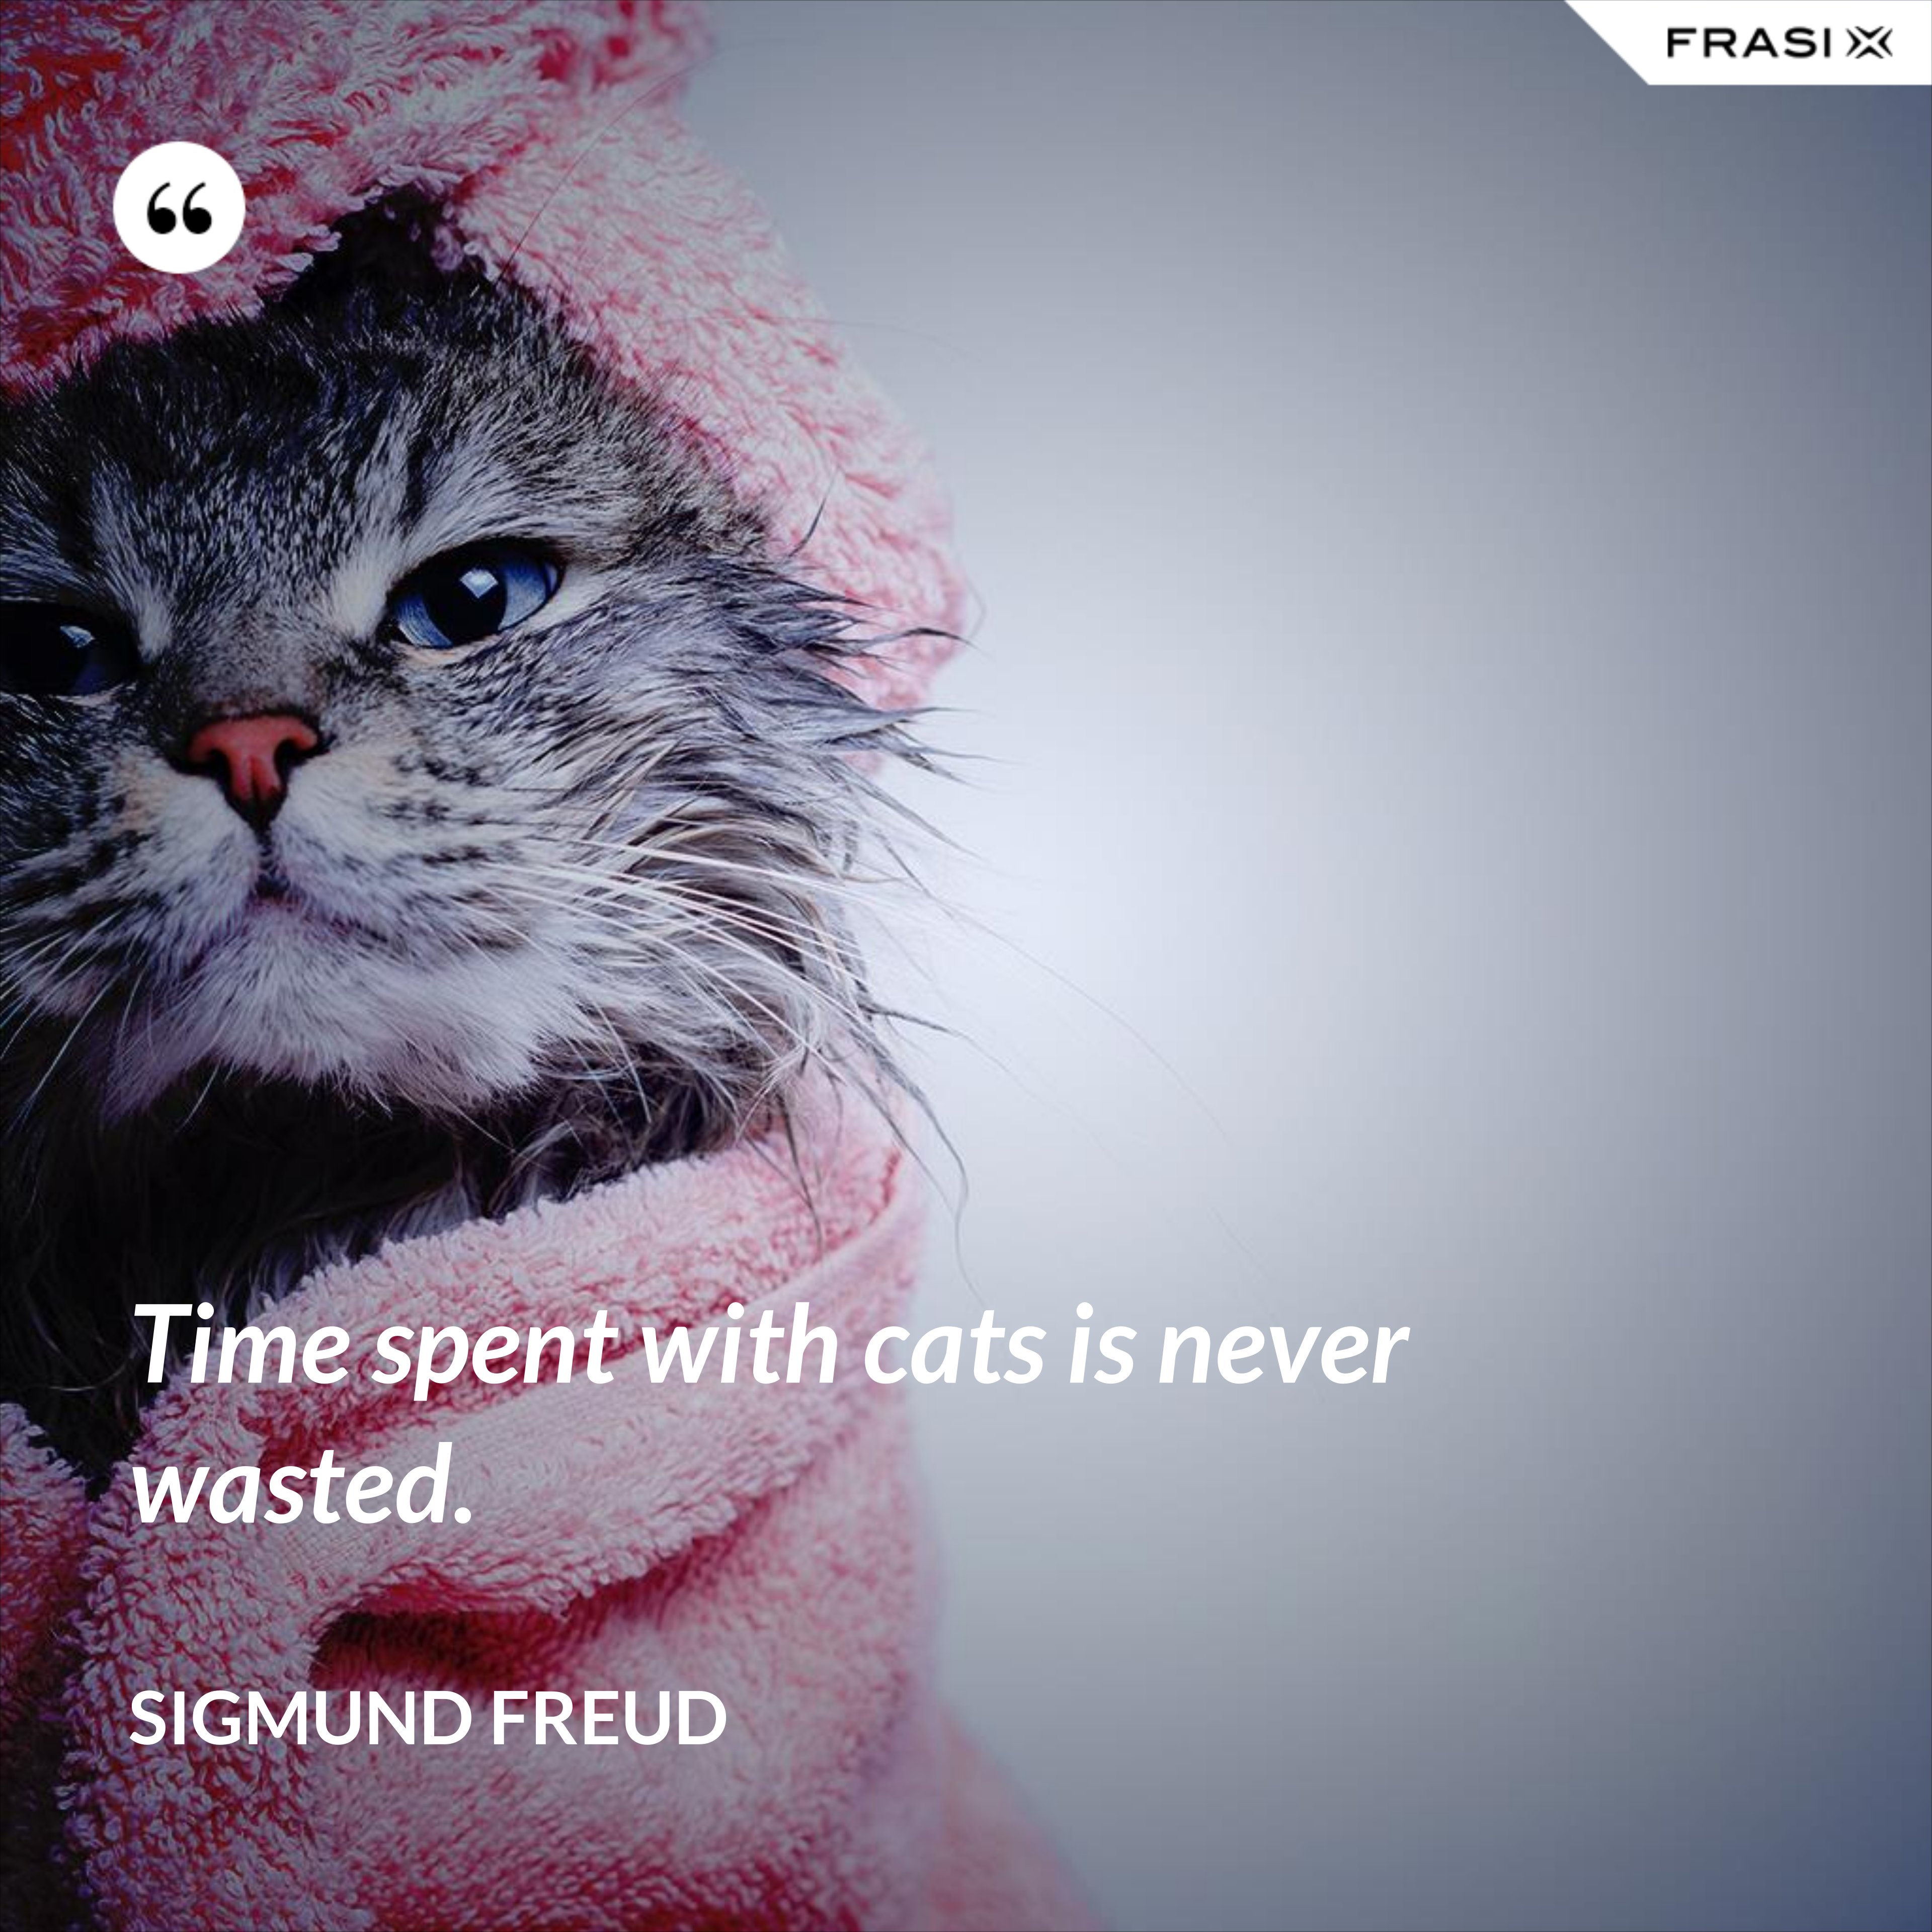 Time spent with cats is never wasted. - Sigmund Freud